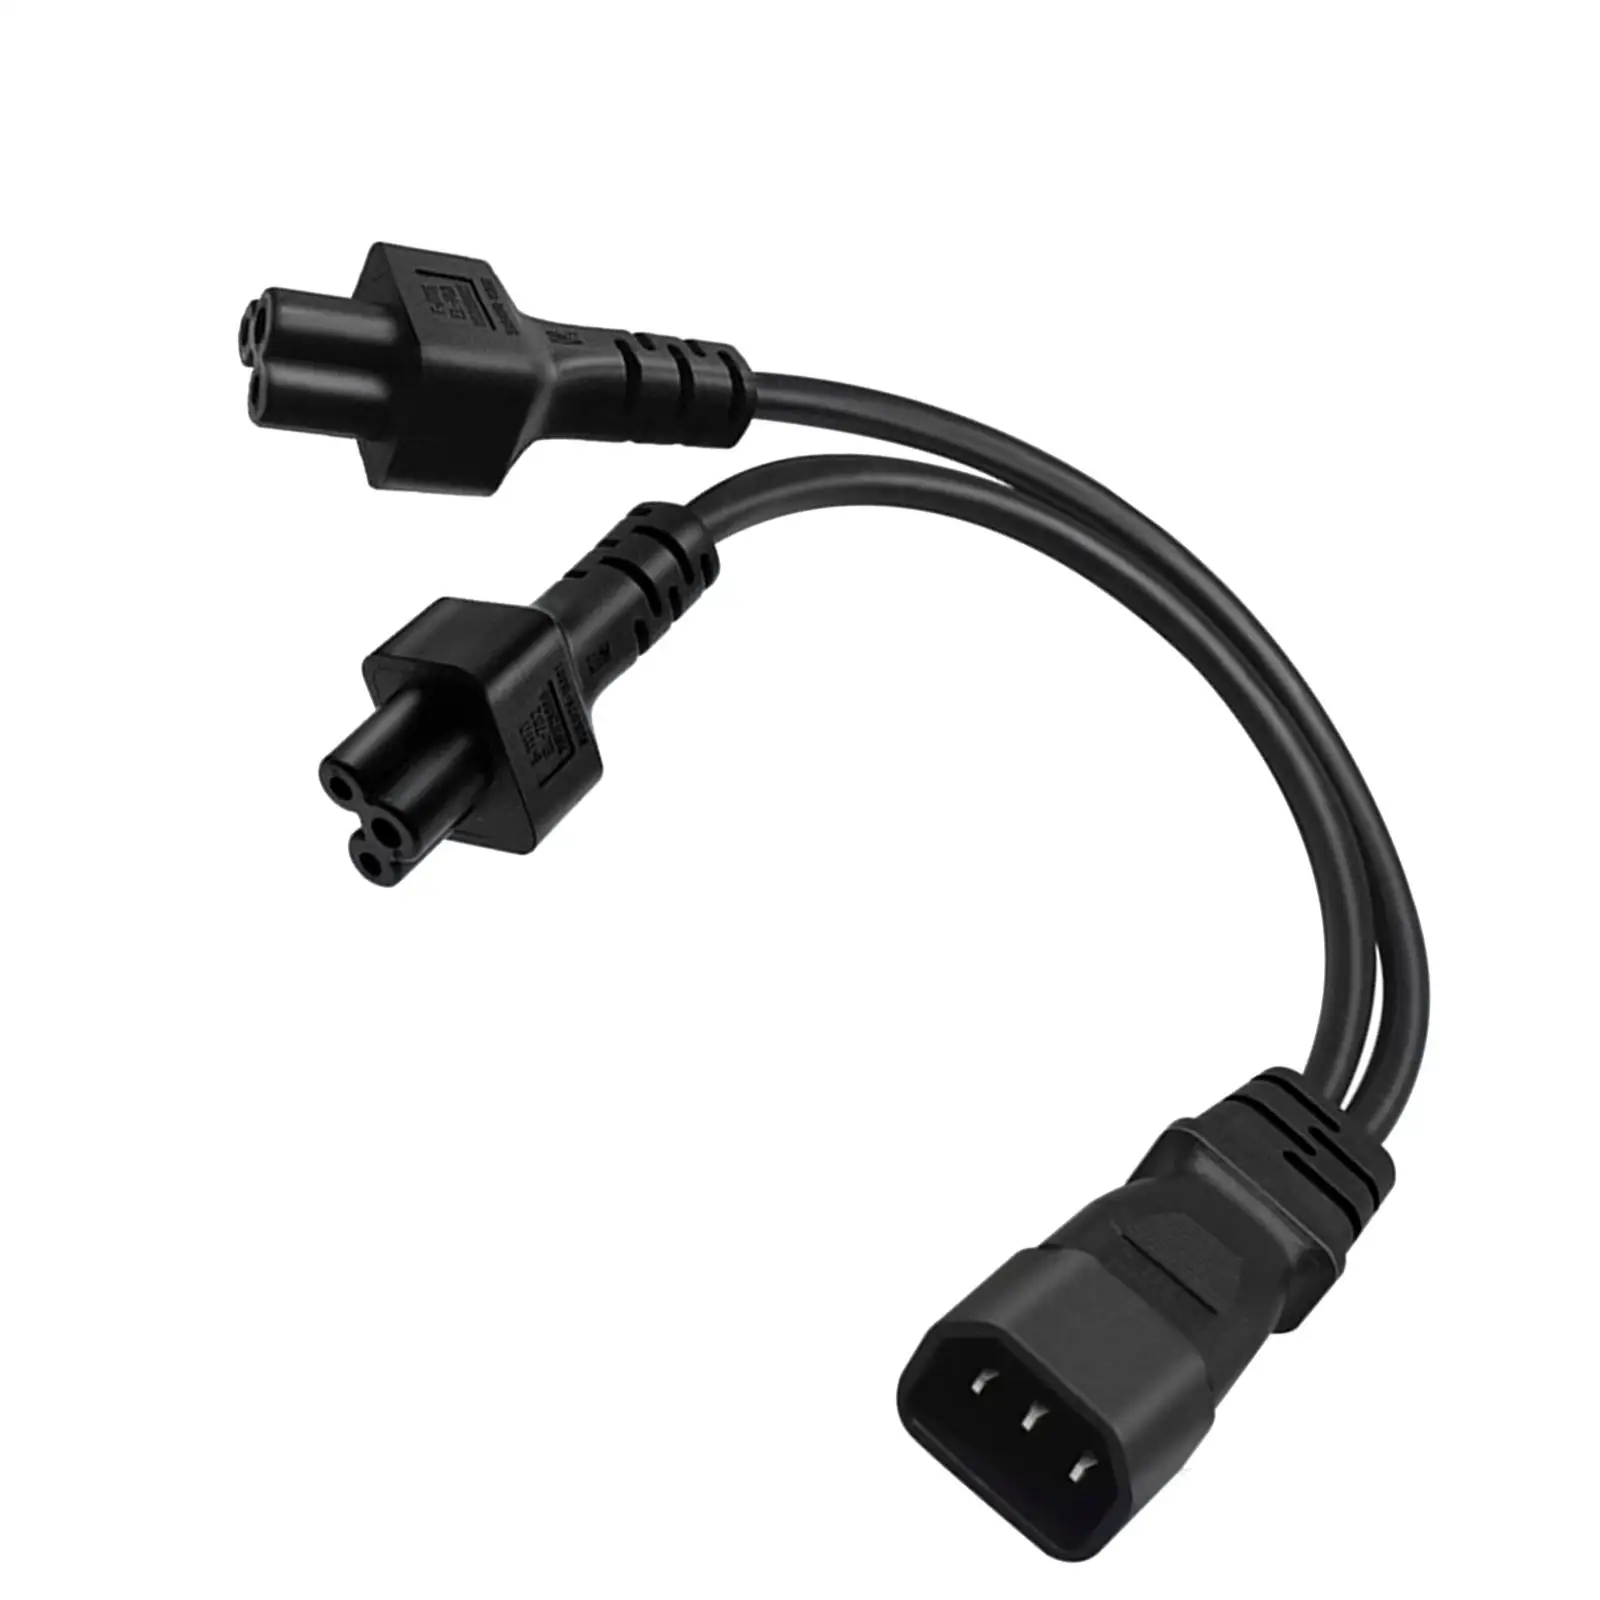 IEC320 C14 to IEC320 Dual C5 Splitter Power Cable Replacement for Computer